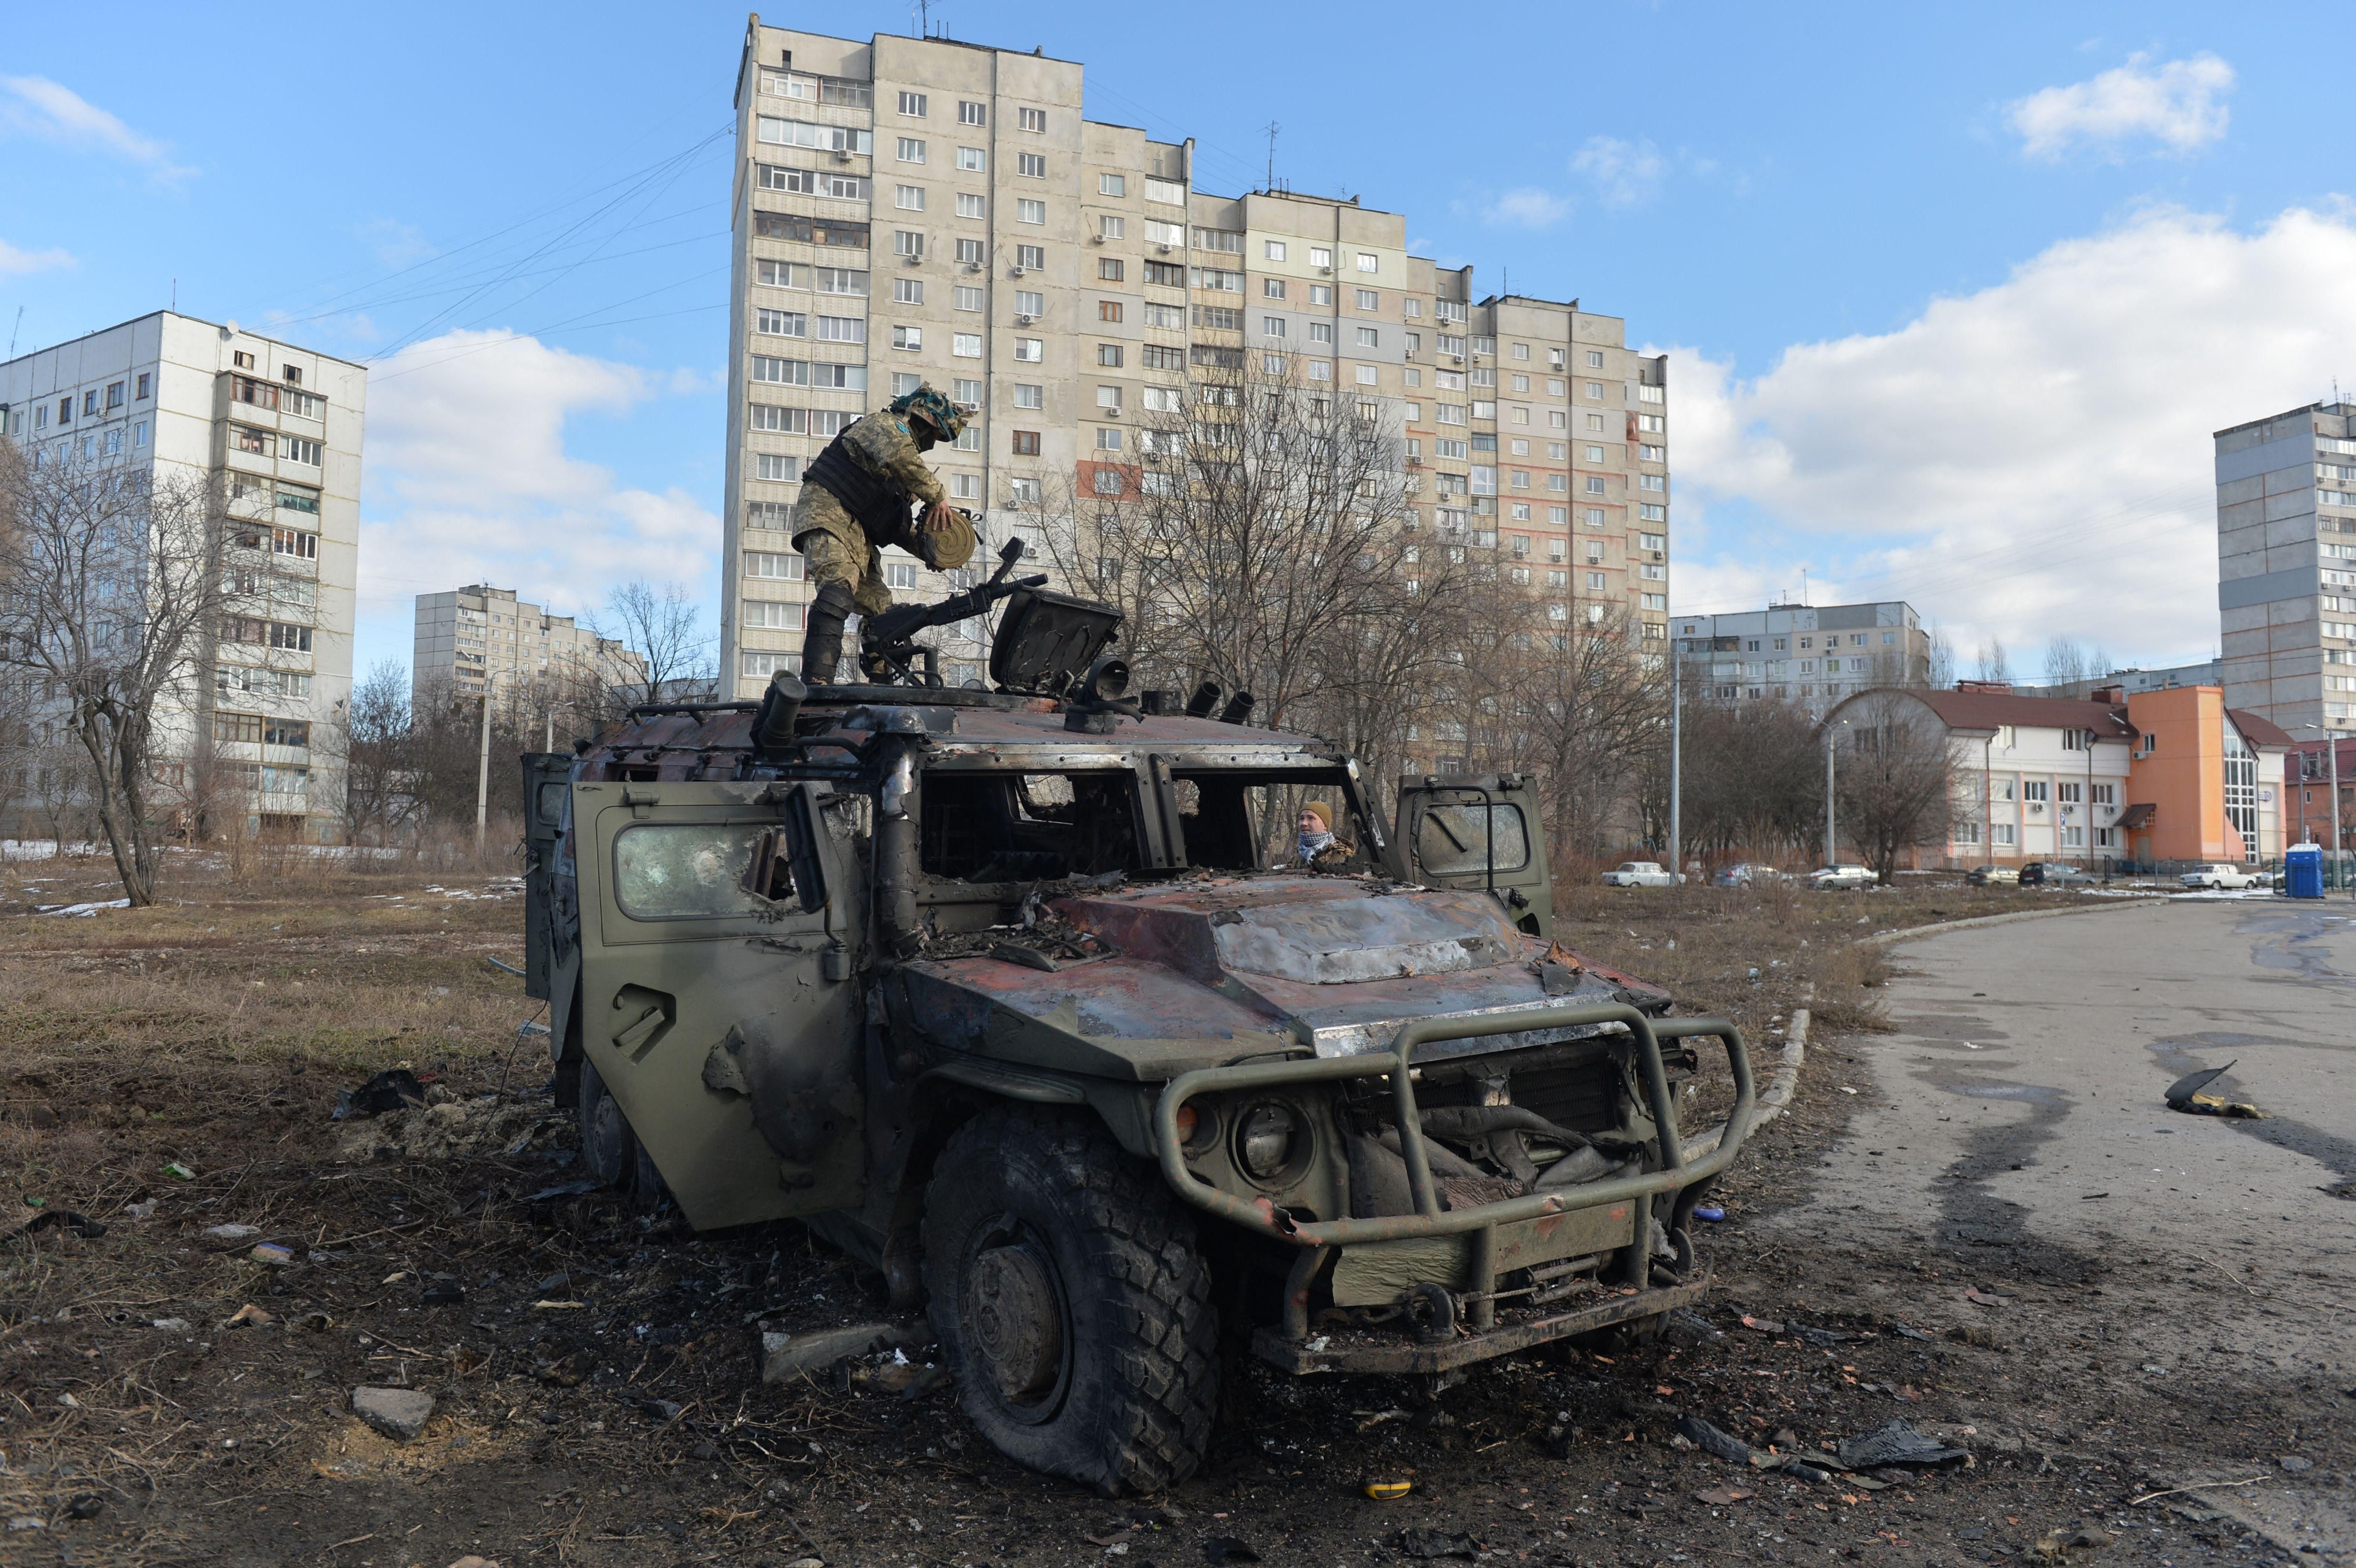 A Ukrainian soldier examines a destroyed Russian infantry mobility vehicle after fighting in Kharkiv, Ukraine on February 27, 2022.